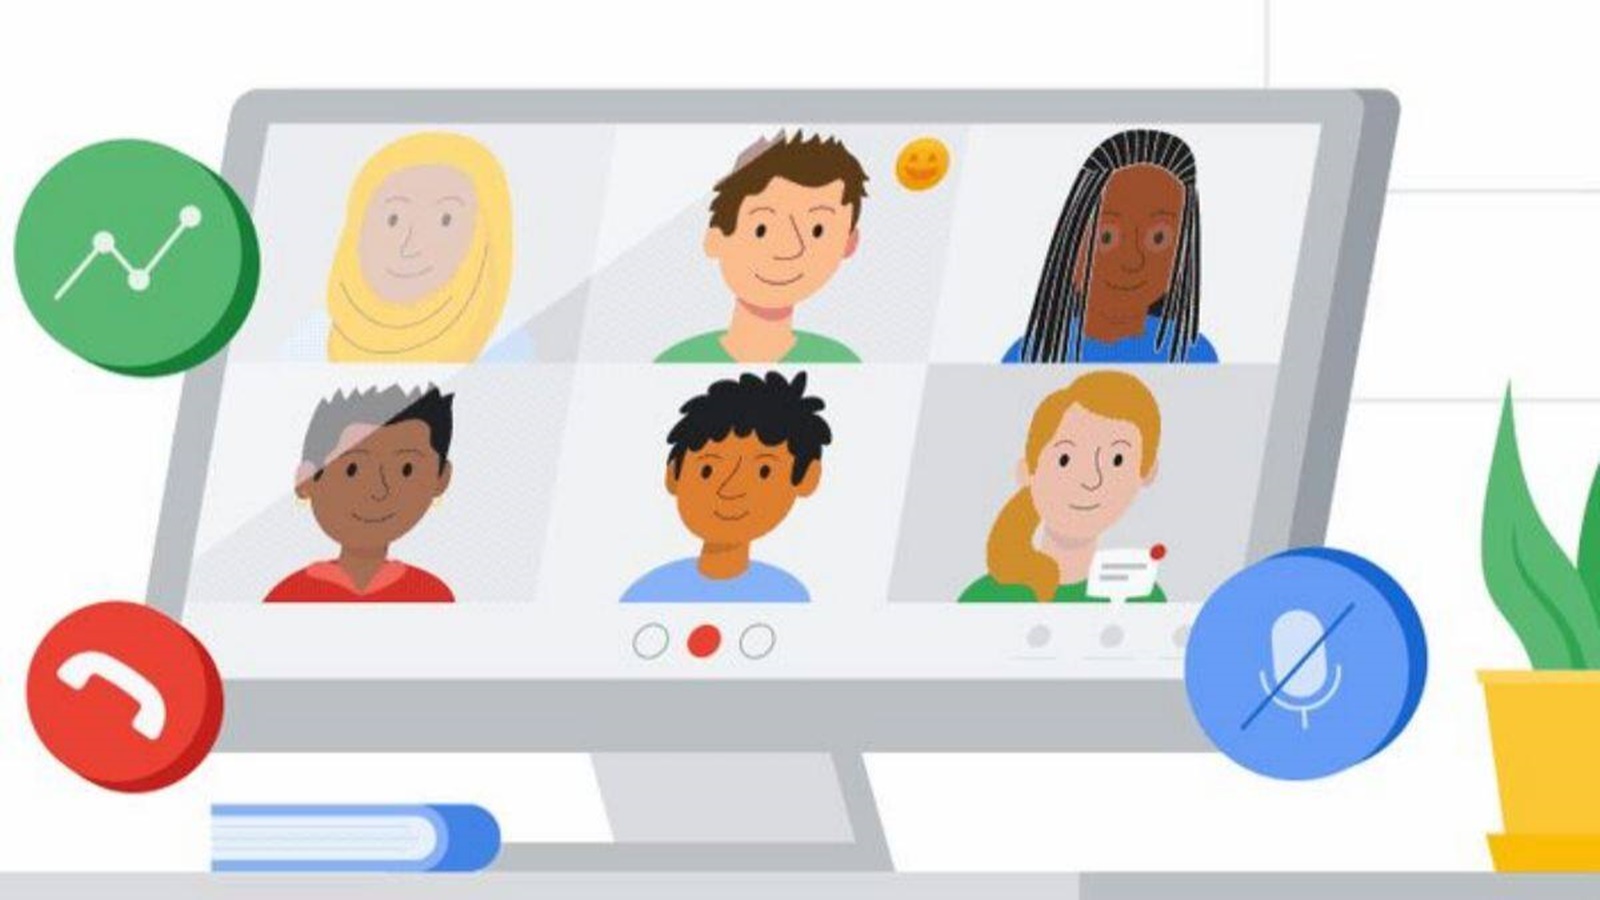 Google Meet adds new backgrounds, filters and introduces Studio lighting | Technology News